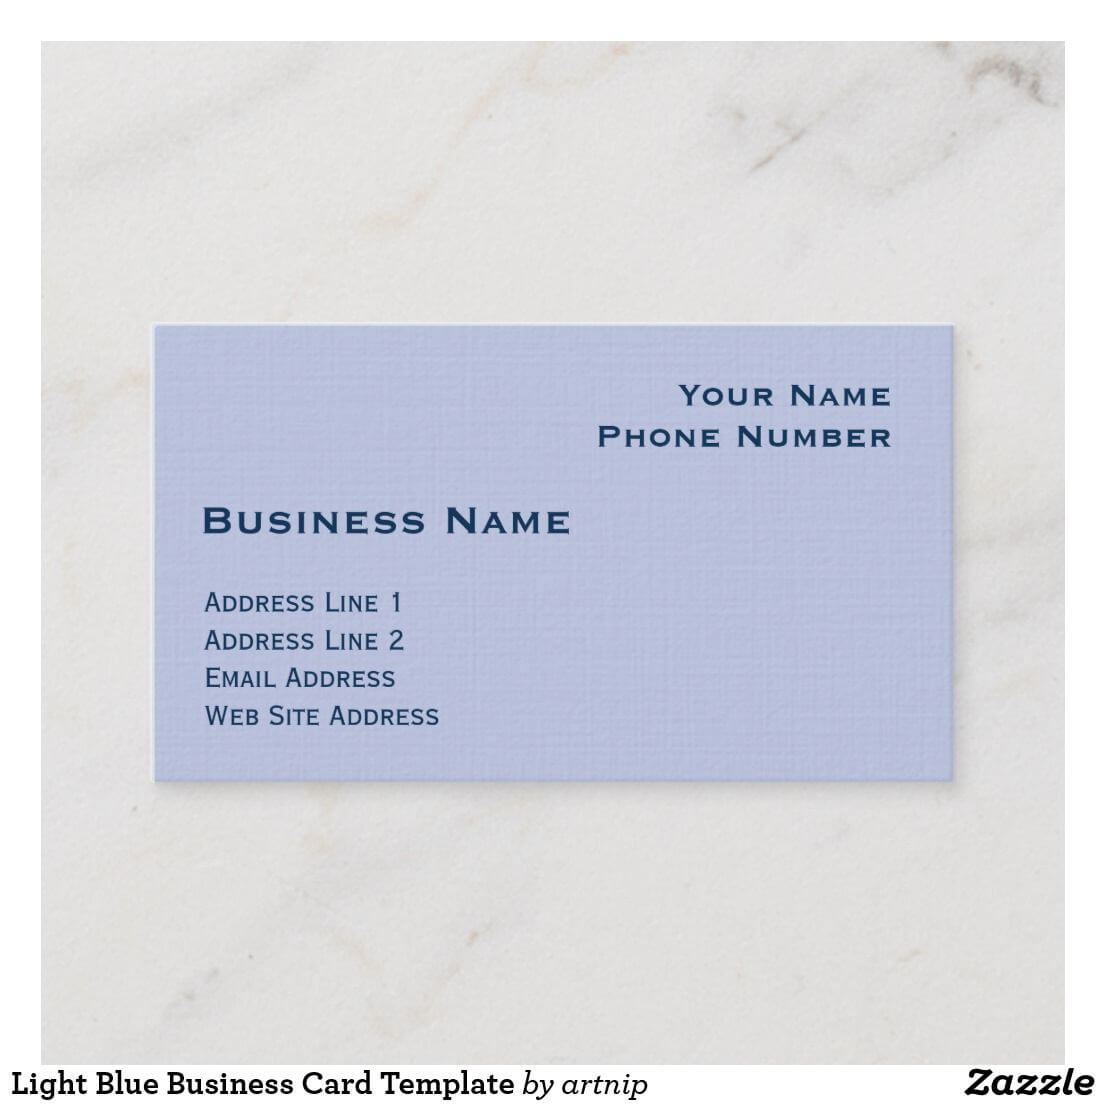 Light Blue Business Card Template | Zazzle In 2019 Regarding Cards Against Humanity Template